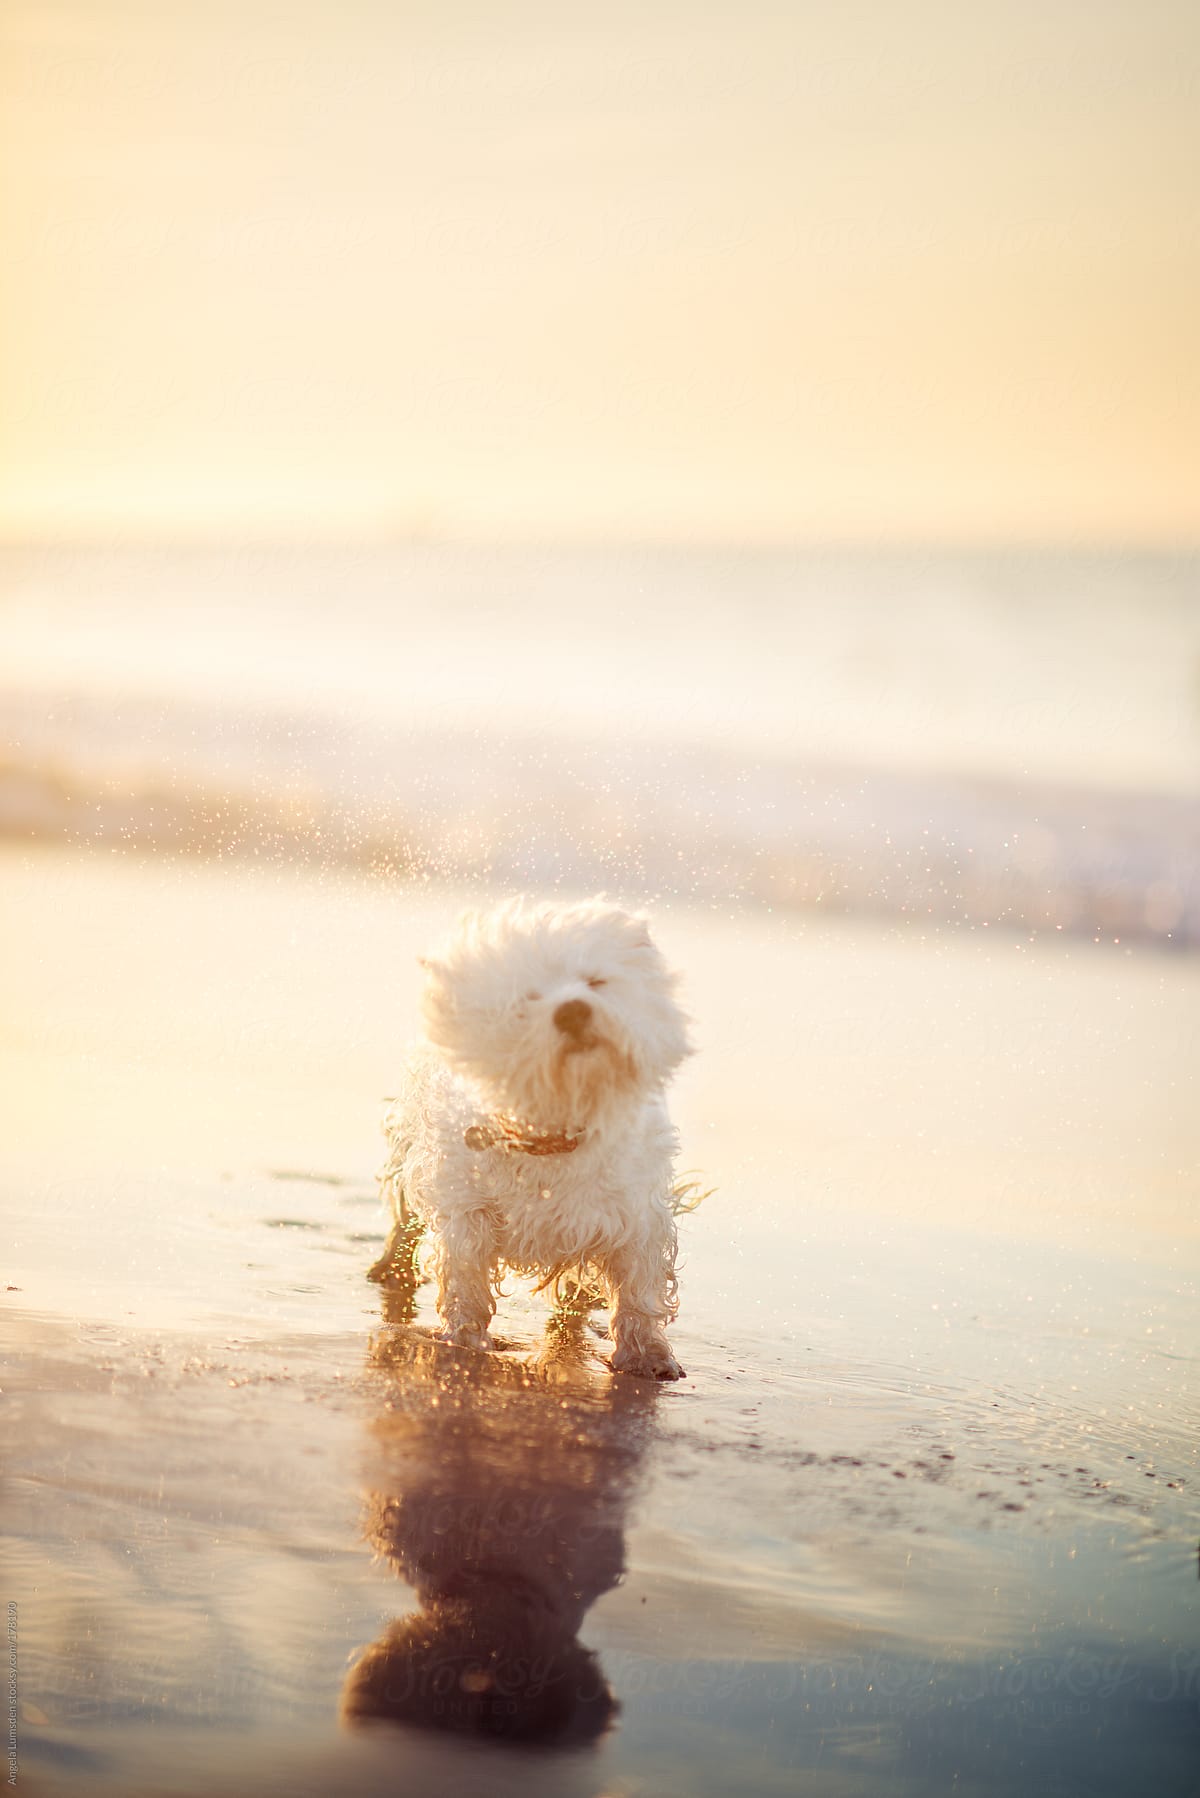 White dog shaking water droplets at the beach at sunset